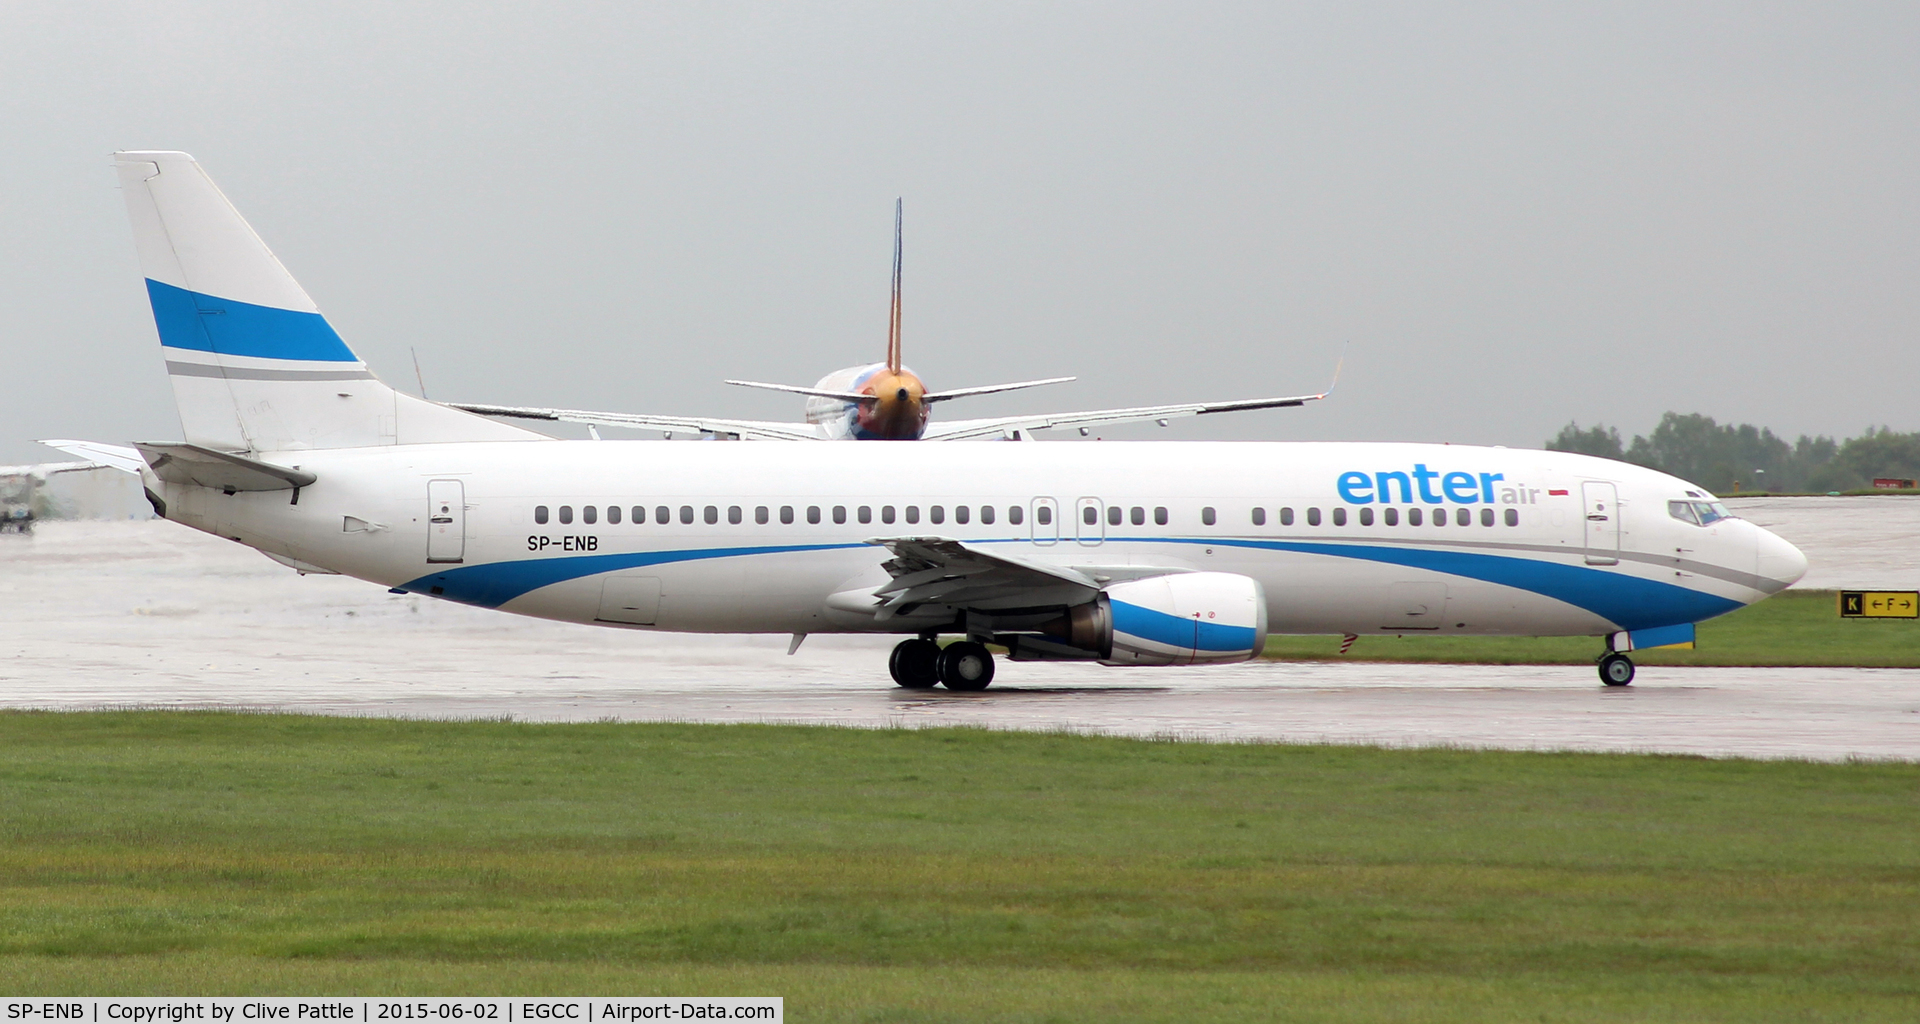 SP-ENB, 1994 Boeing 737-4Q8 C/N 26299, Taxy for departure Manchester Airport EGCC